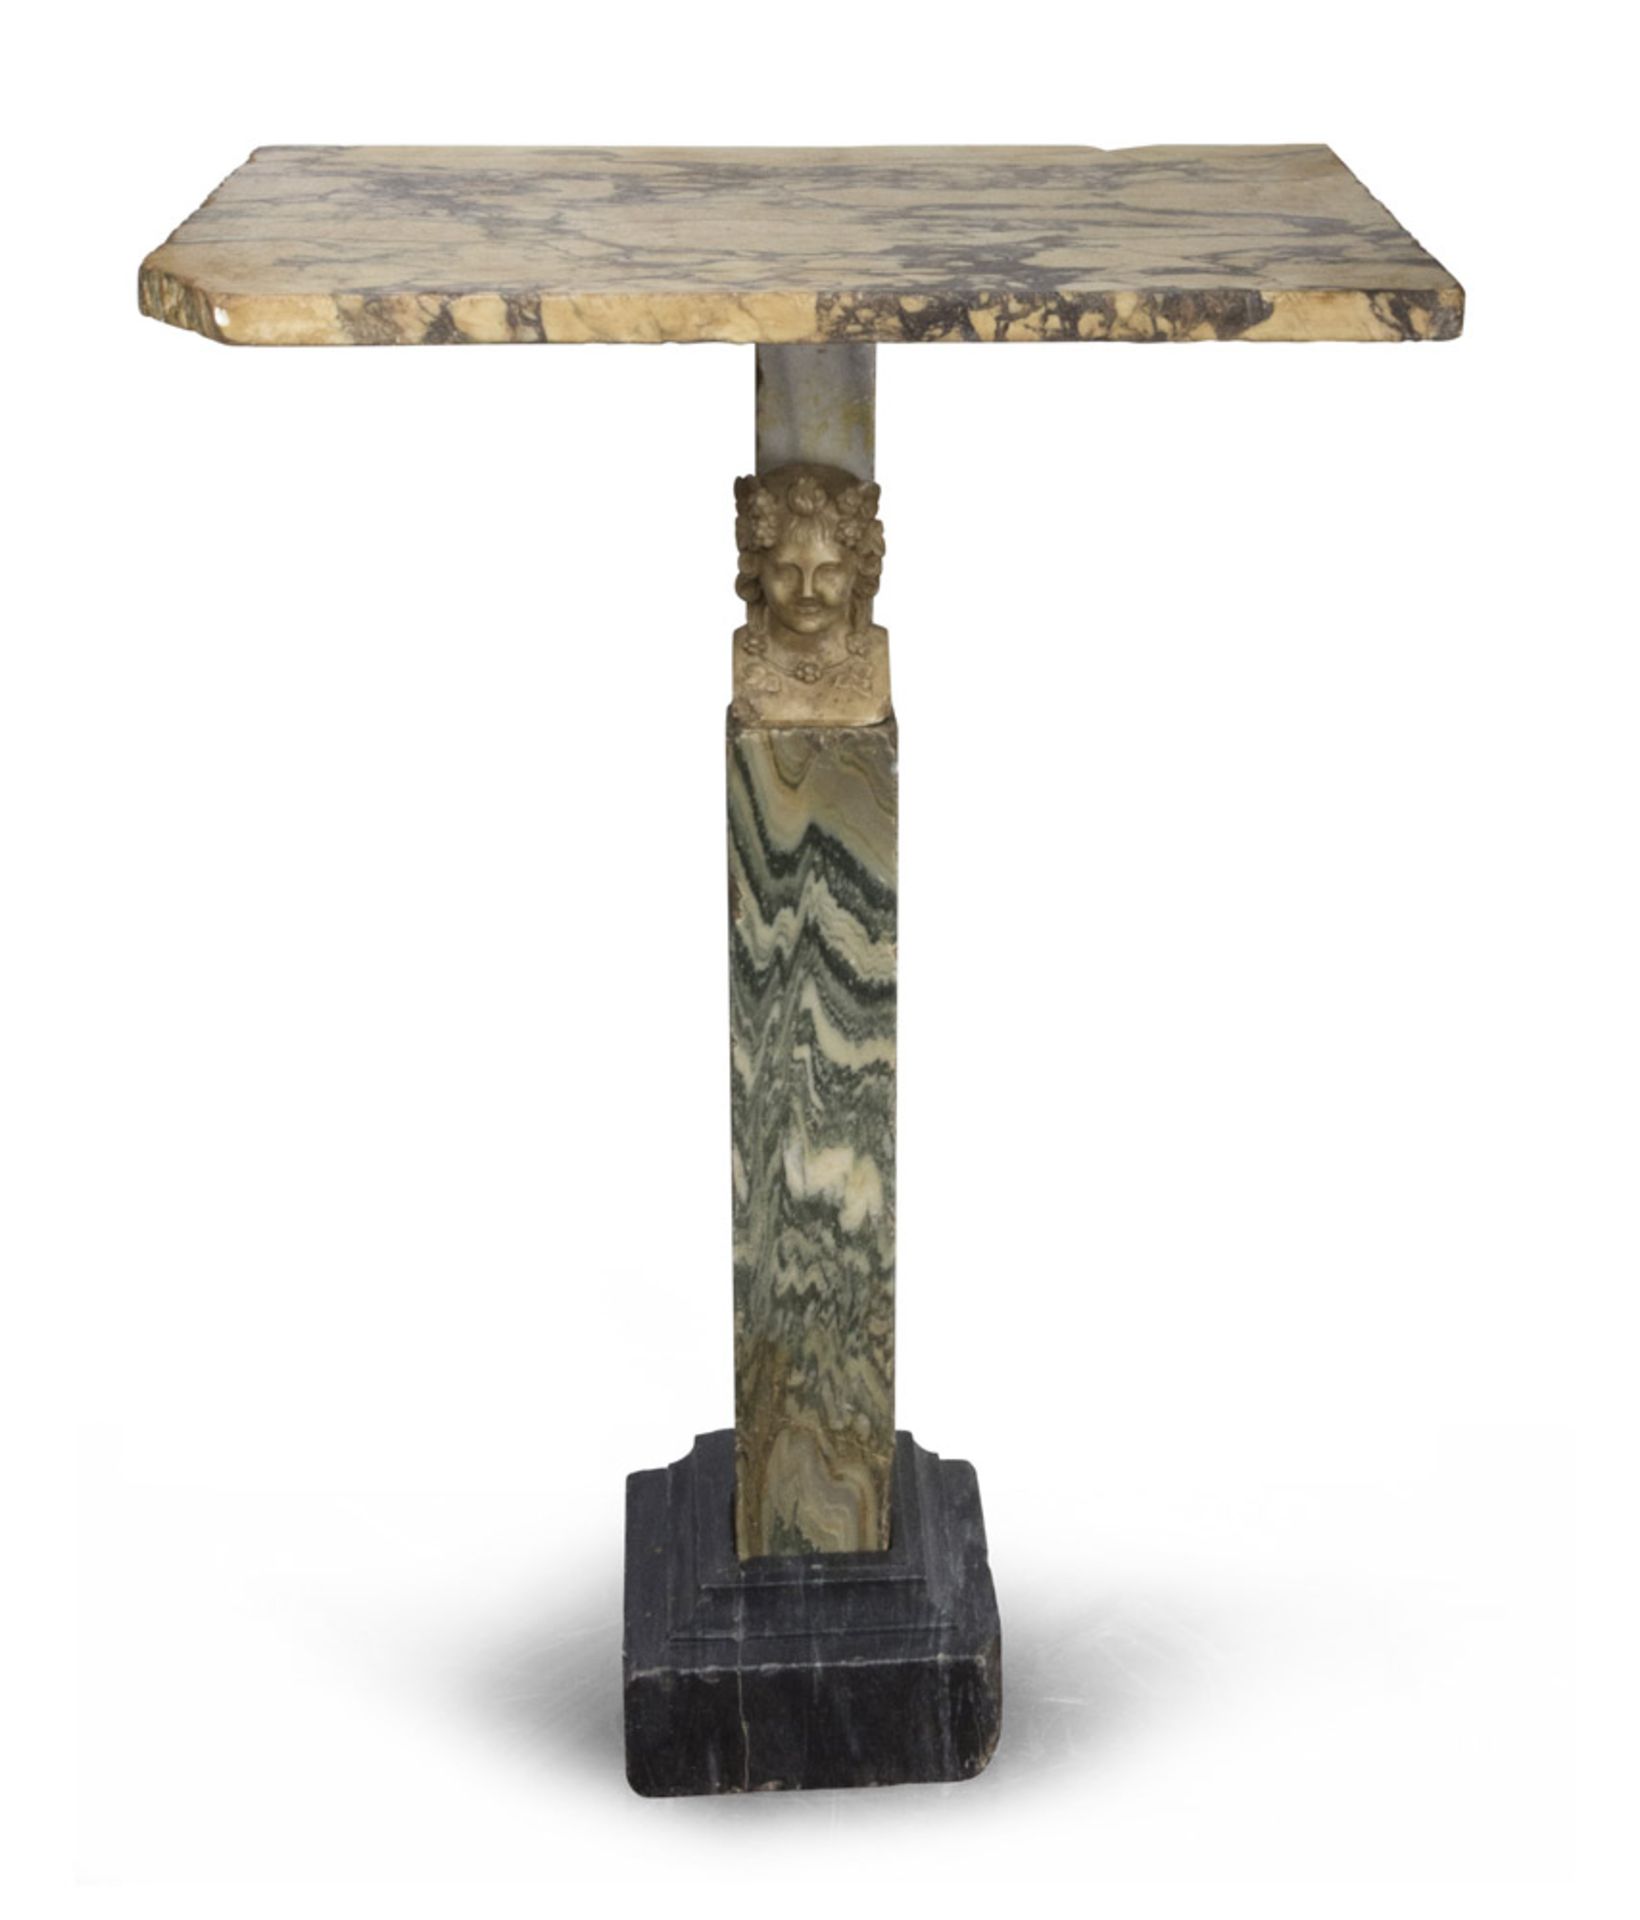 SMALL WALL TABLE IN ANCIENT MARBLES, ROME LATE 18TH CENTURY with cipollino upright with classical